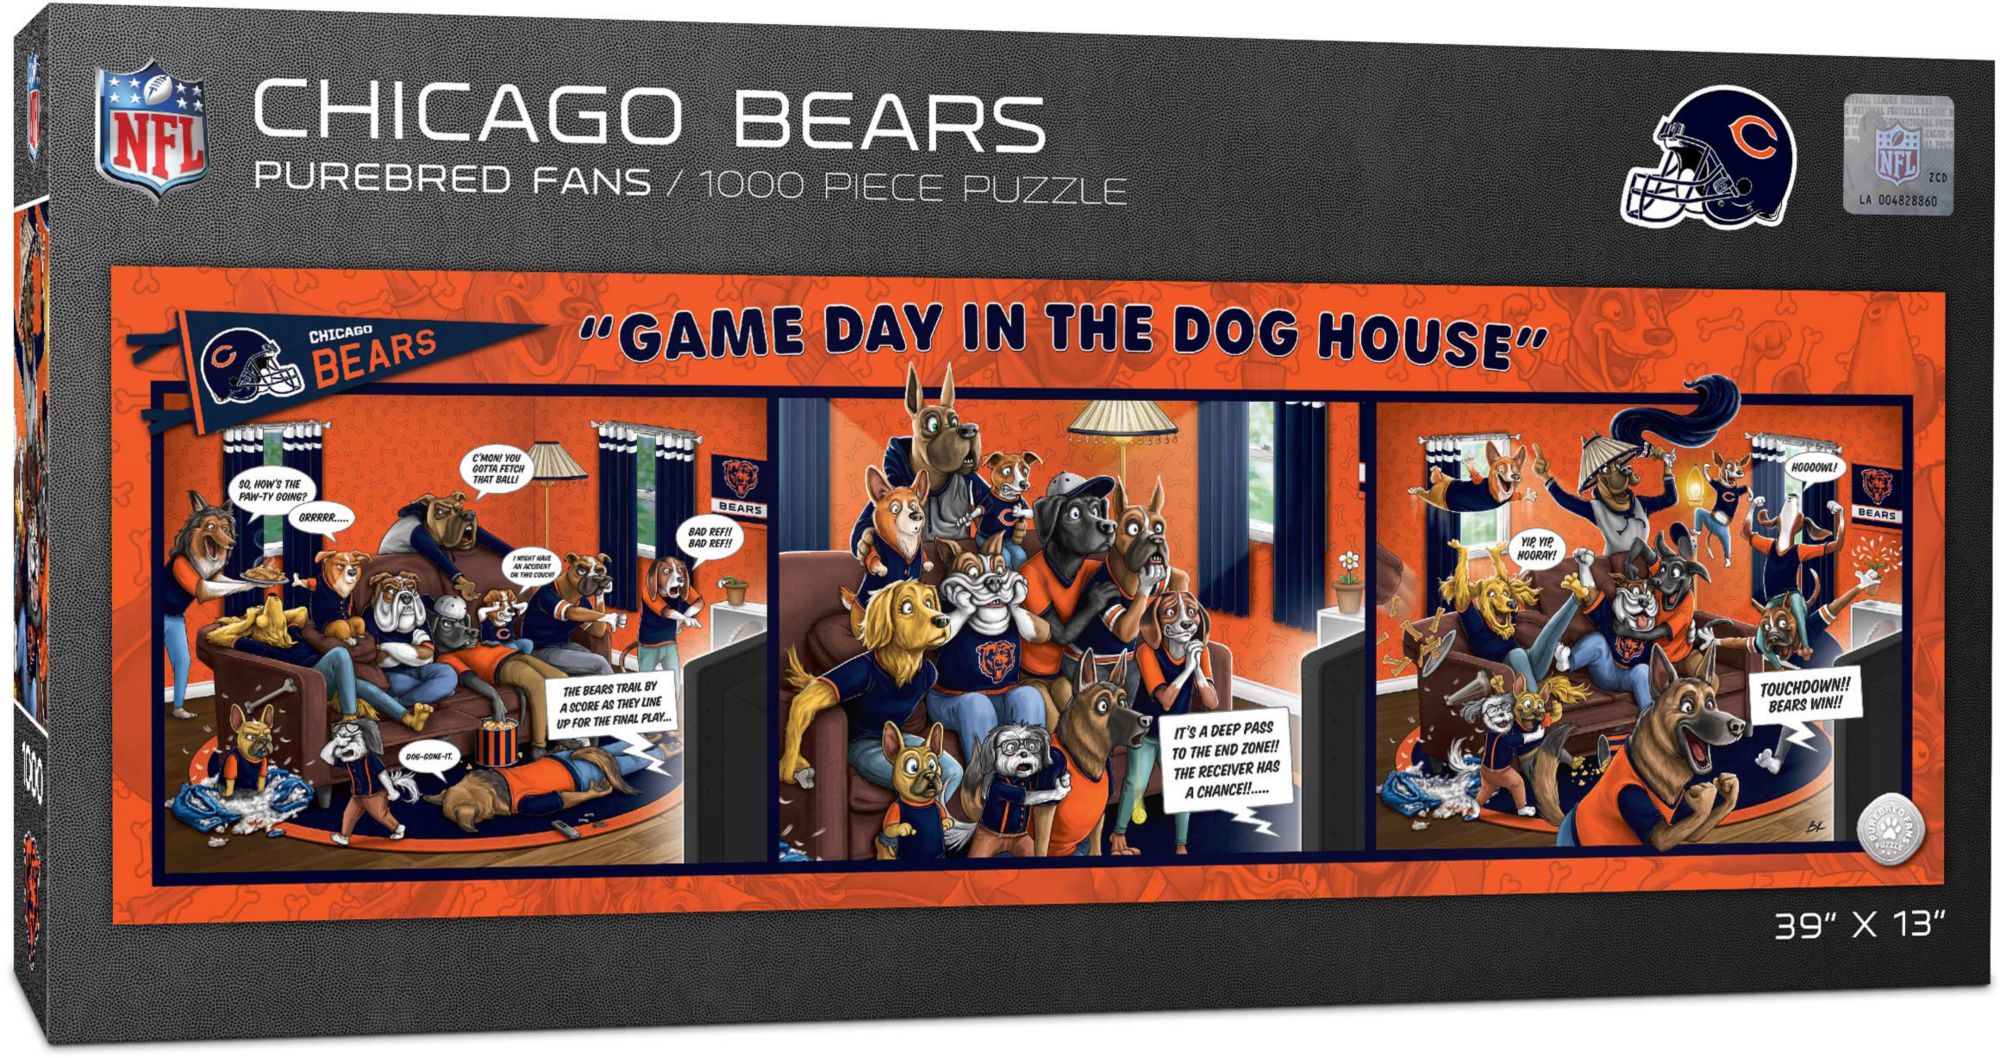 You The Fan Chicago Bears Gameday In The Dog House Puzzle